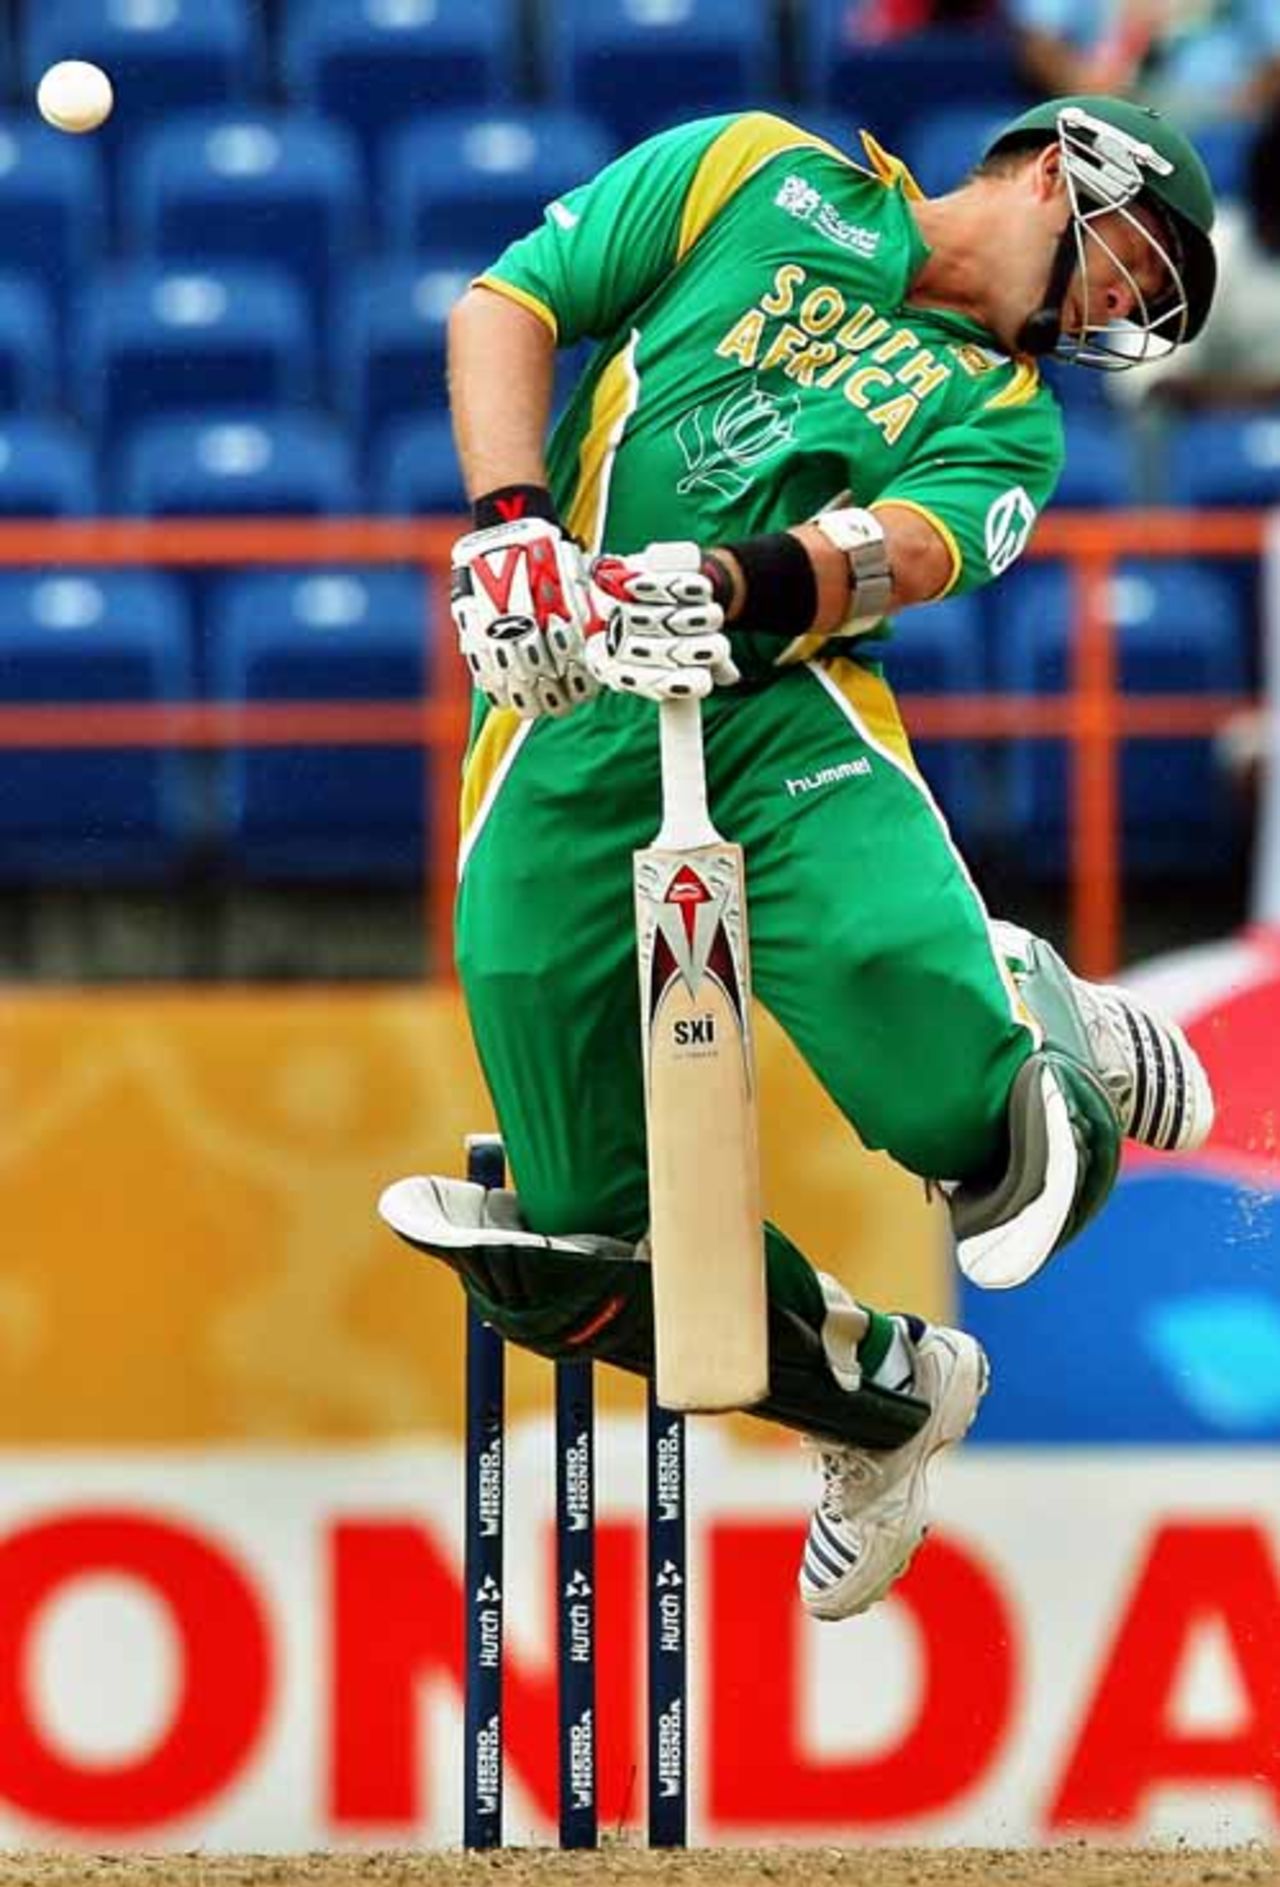 Jacques Kallis sways out of a lifter from Shane Bond, New Zealand v South Africa, Super Eights, Grenada, April 14, 2007